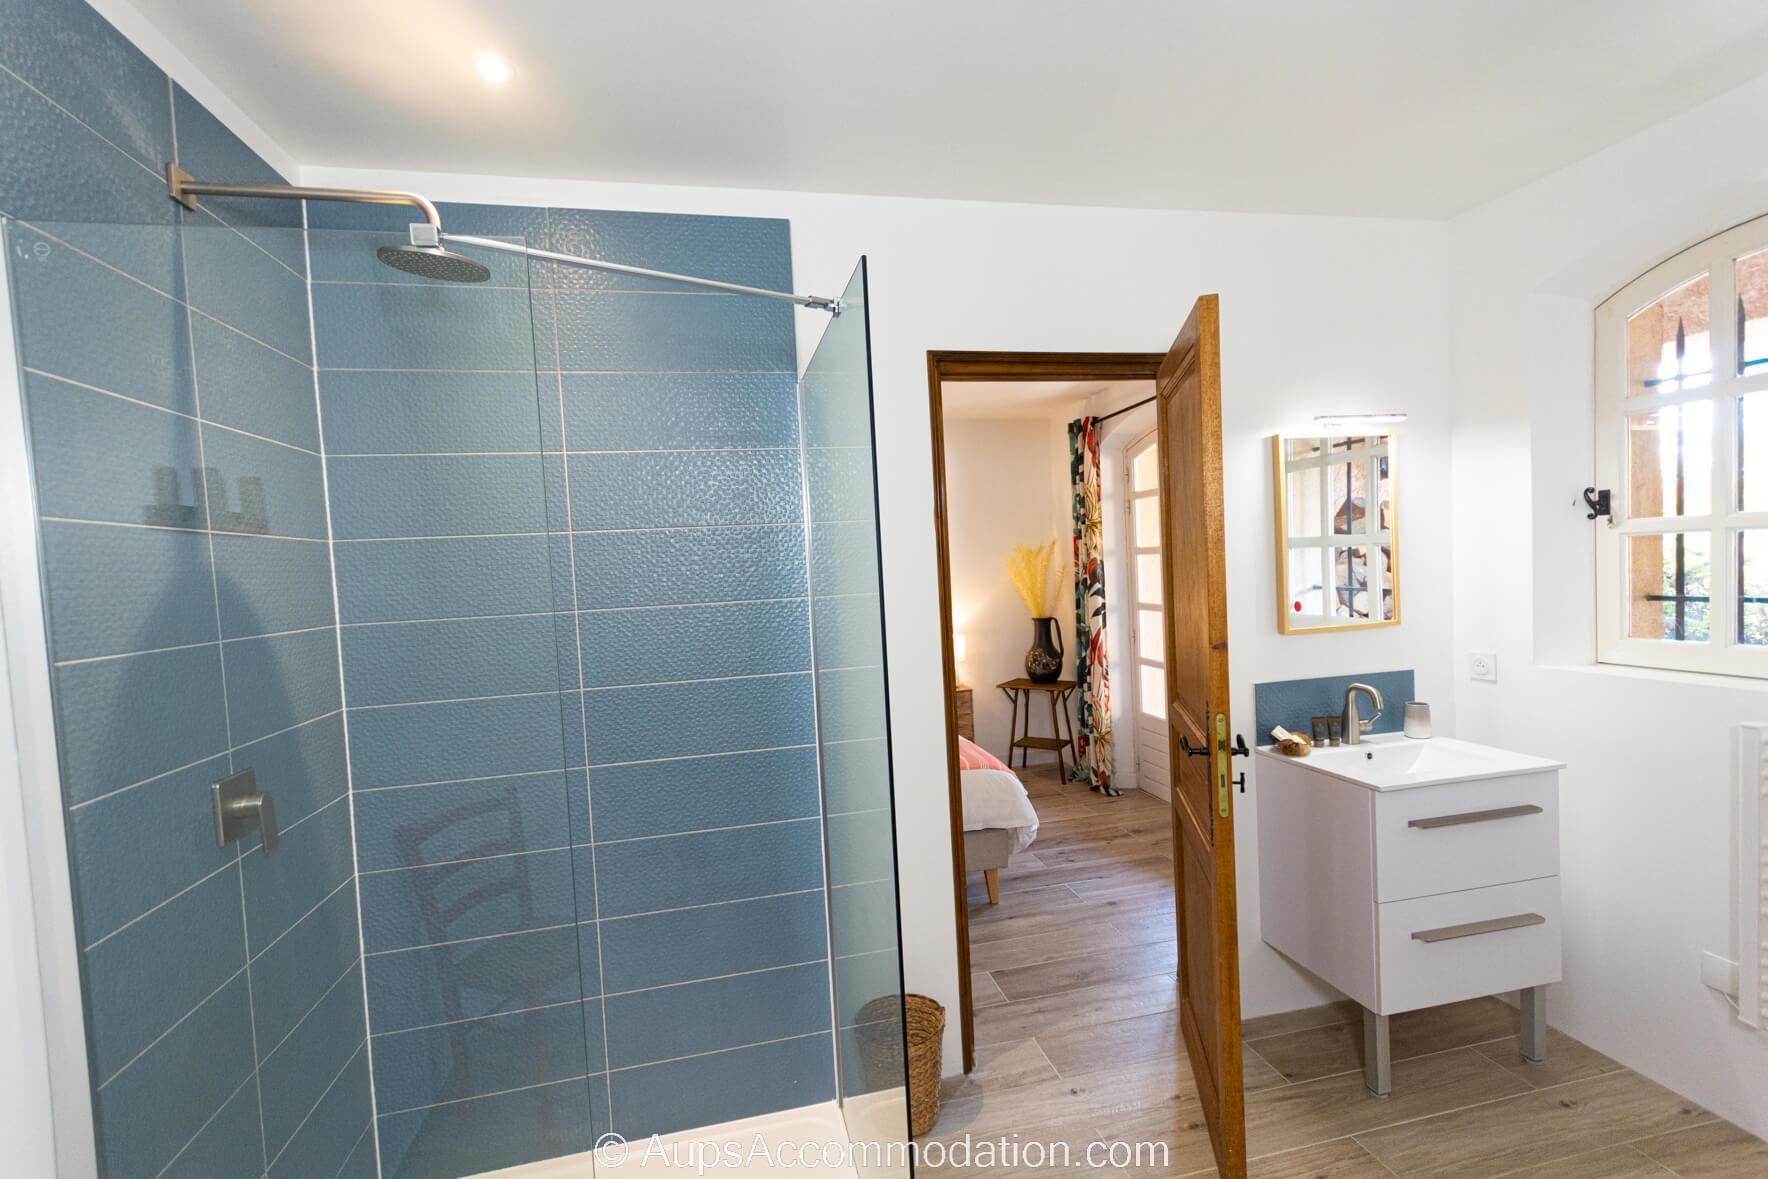 Le Mas Aups - Ensuite bathroom to bedroom 1 with shower and separate bath